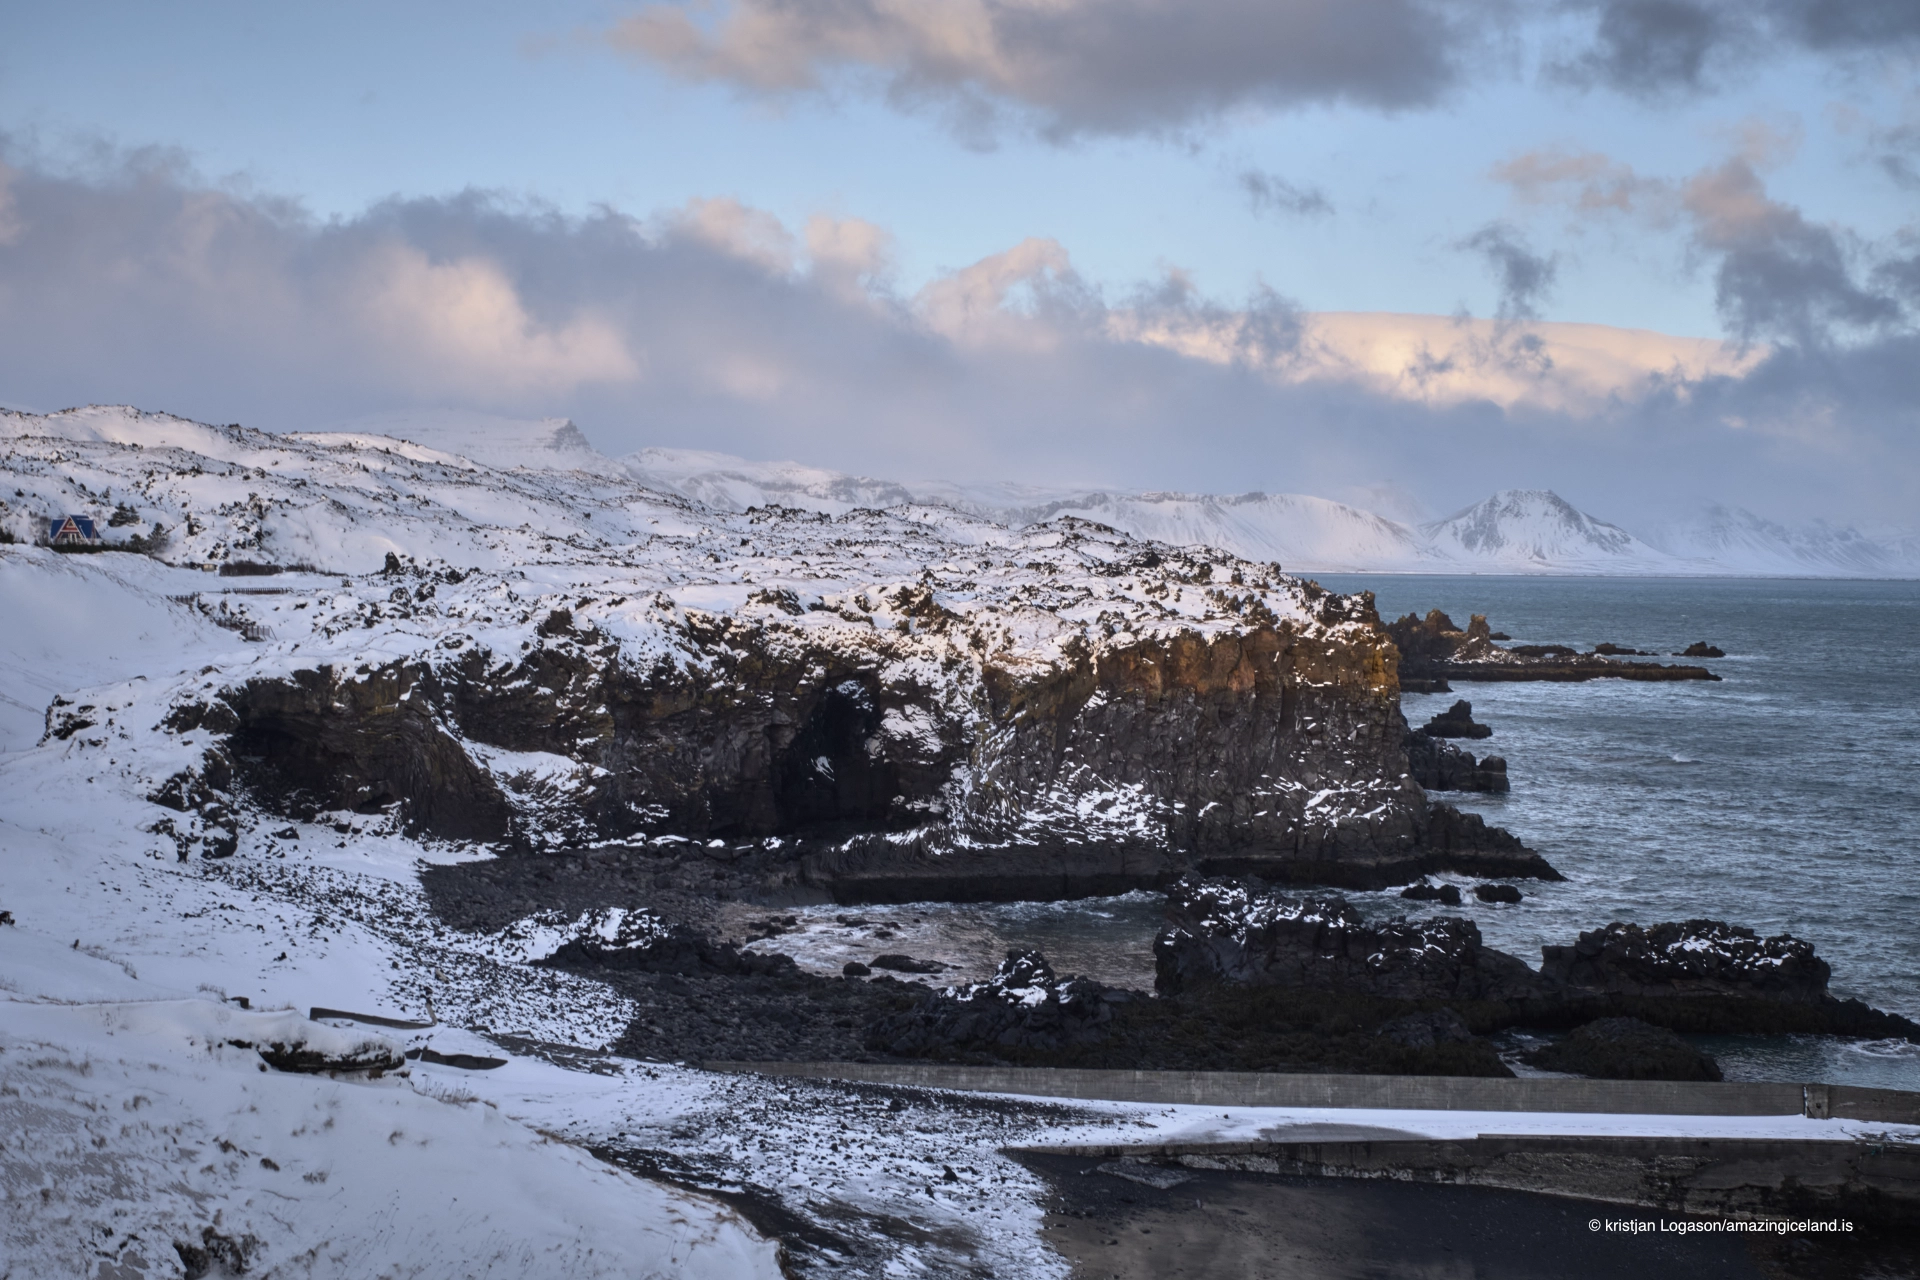 The cove "Baðstofa" at Hellnar in Snæfellsnes Iceland in winter